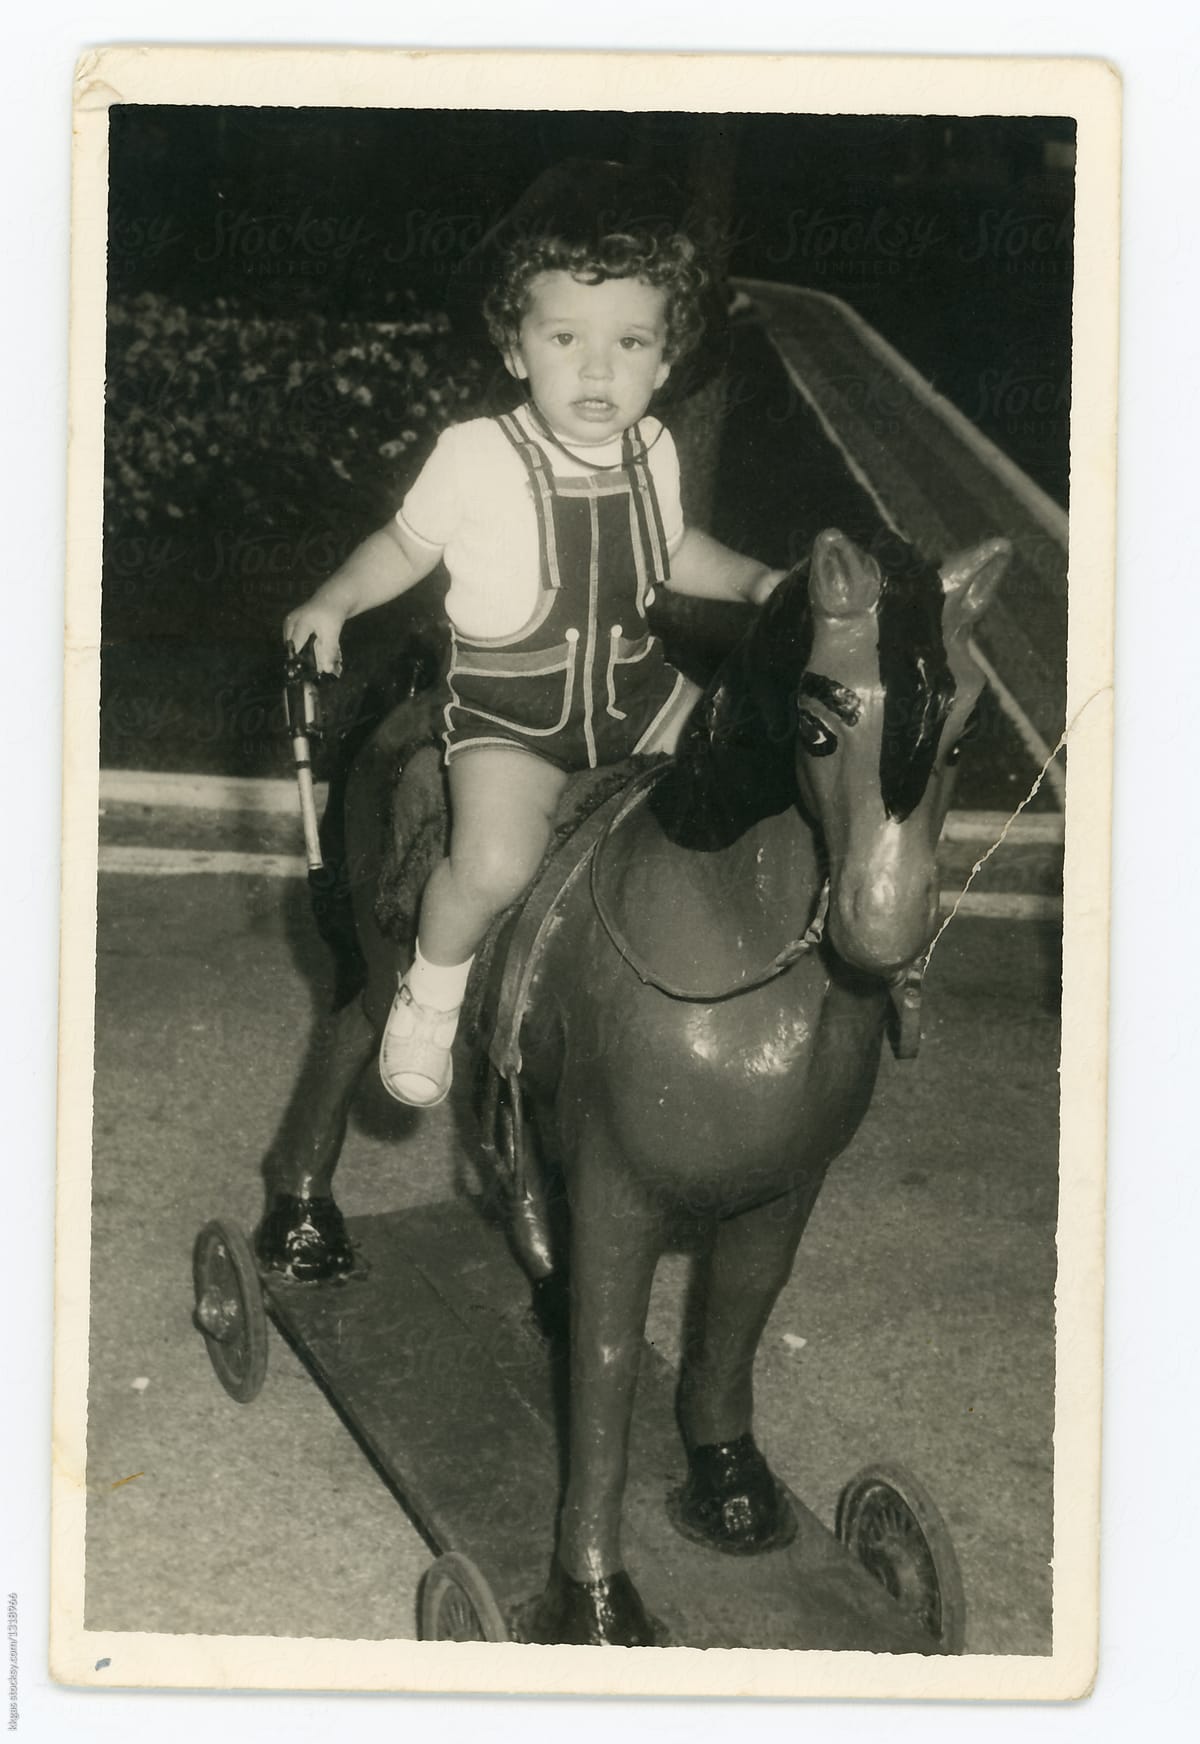 Black and white print of a little boy riding a horse toy